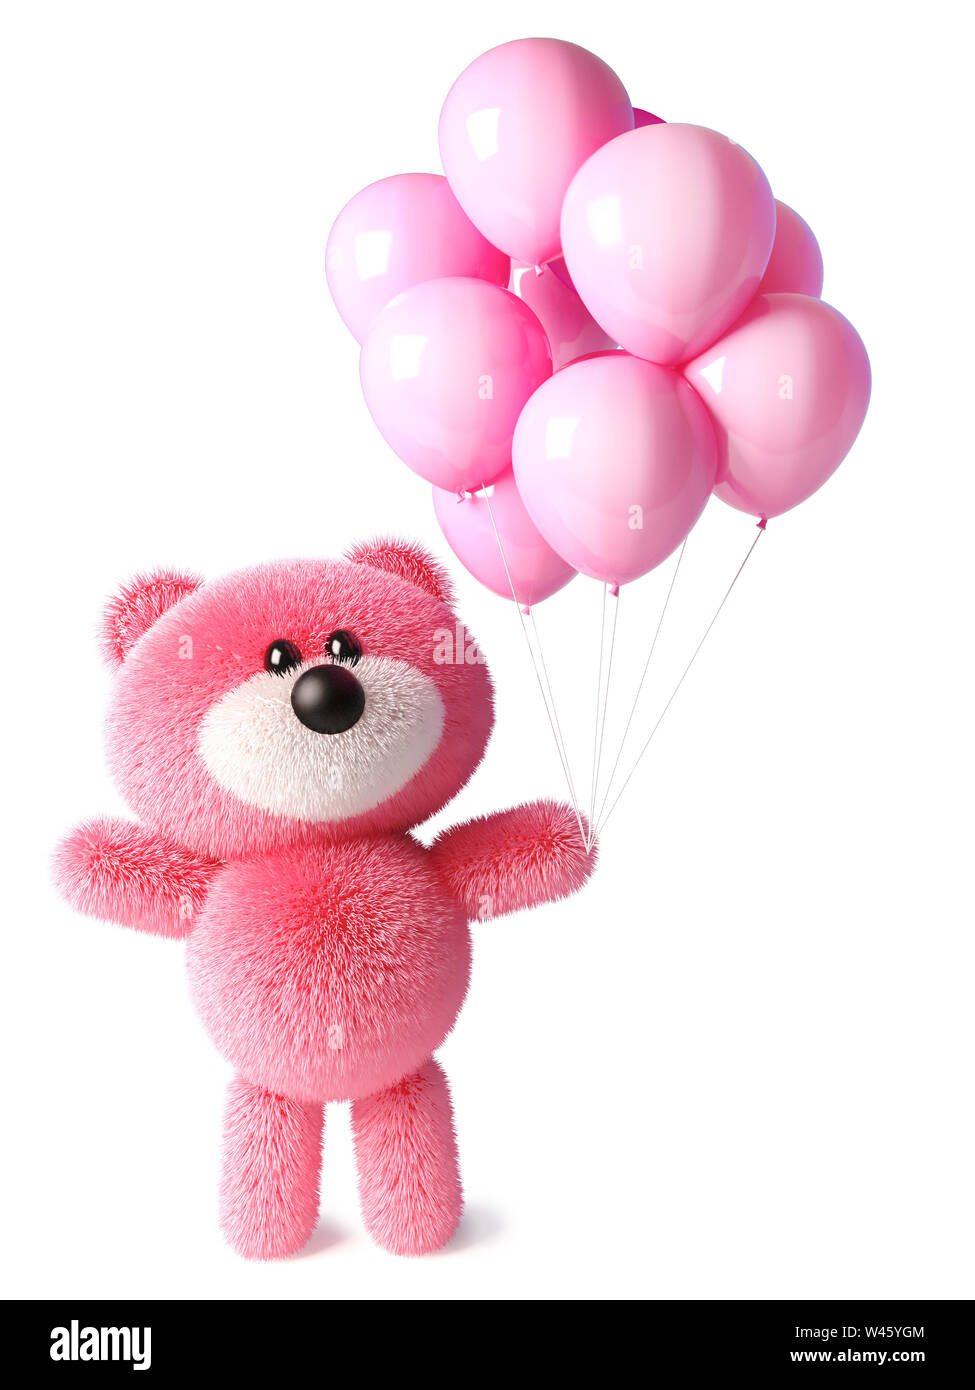 Pink fluffy teddy bear character celebrates with pink party balloons, 3d illustration render Stock Photo